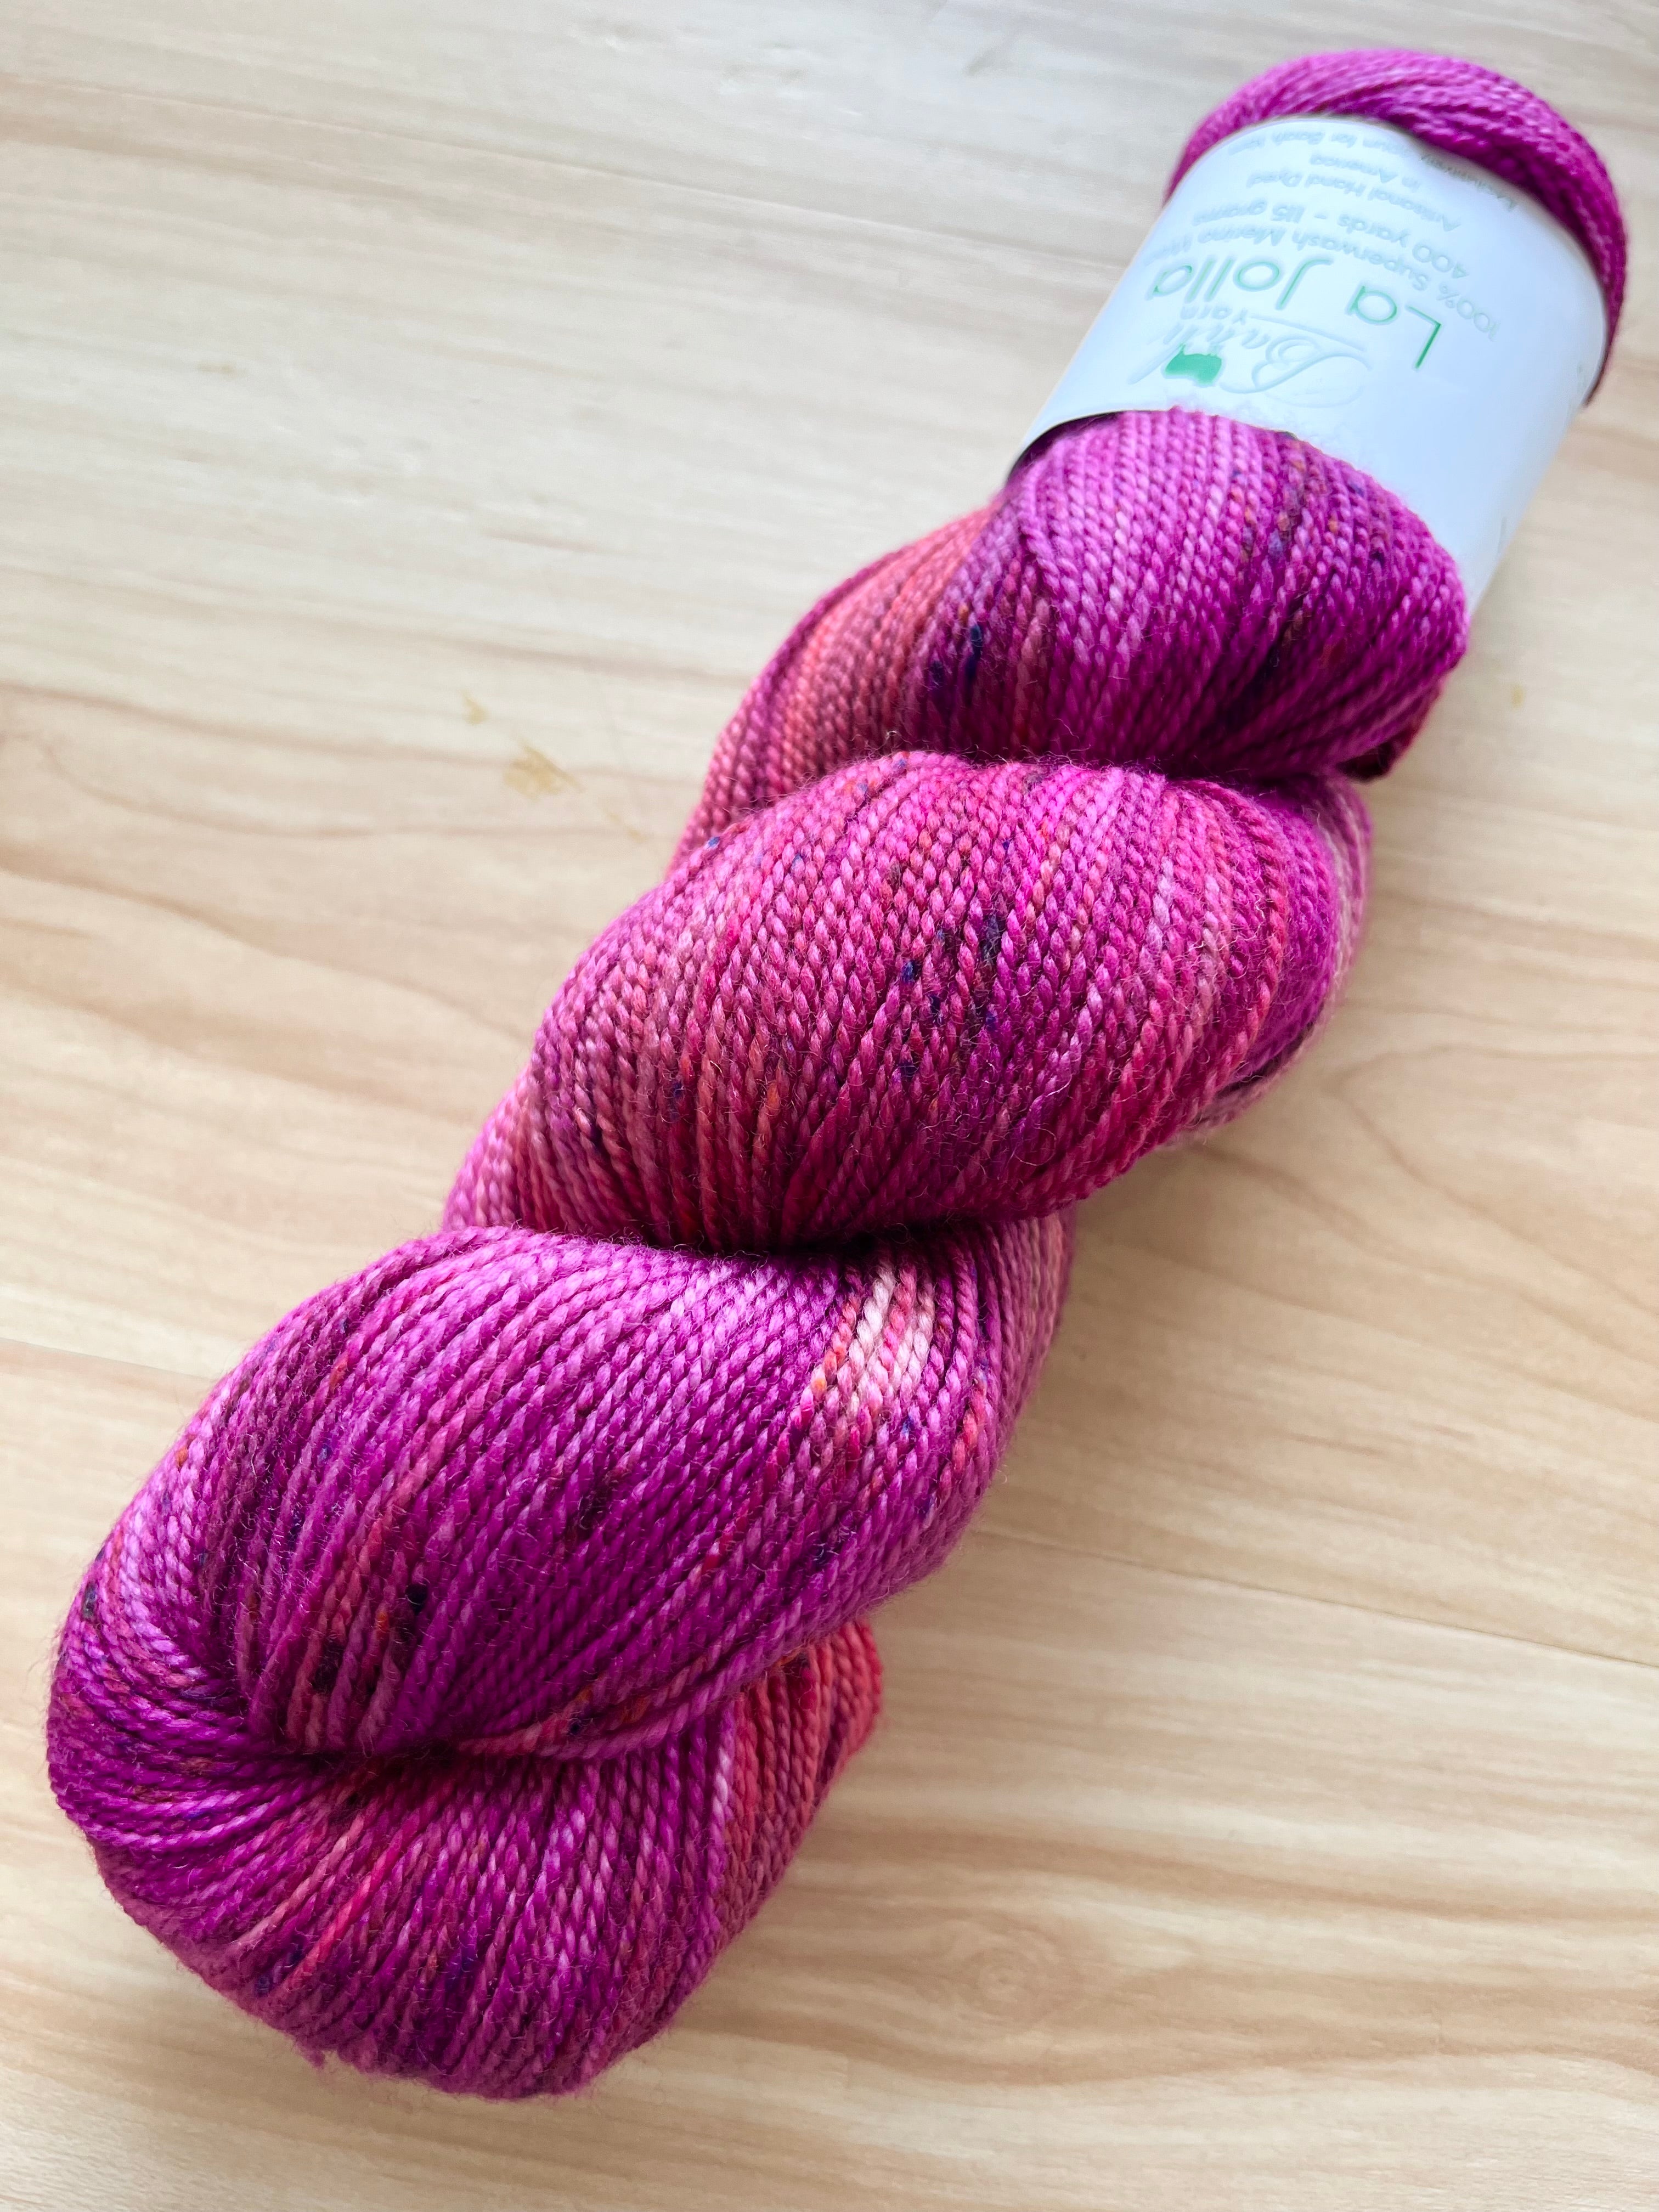 Charged Up Cherry - La Jolla from Baah Yarn